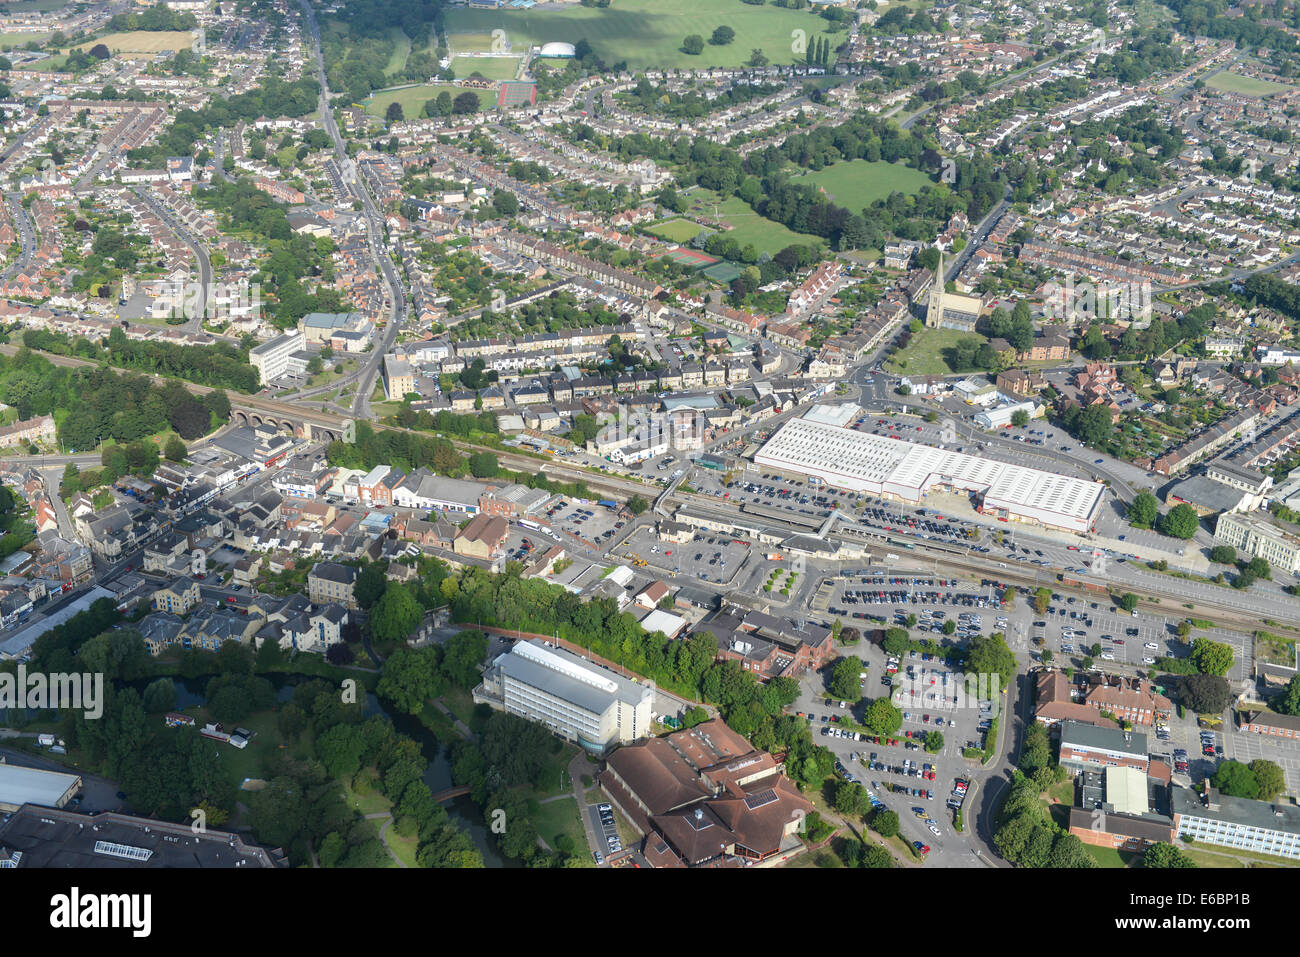 An aerial view of Chippenham in Wiltshire, UK, showing the area around the railway station and town centre. Stock Photo